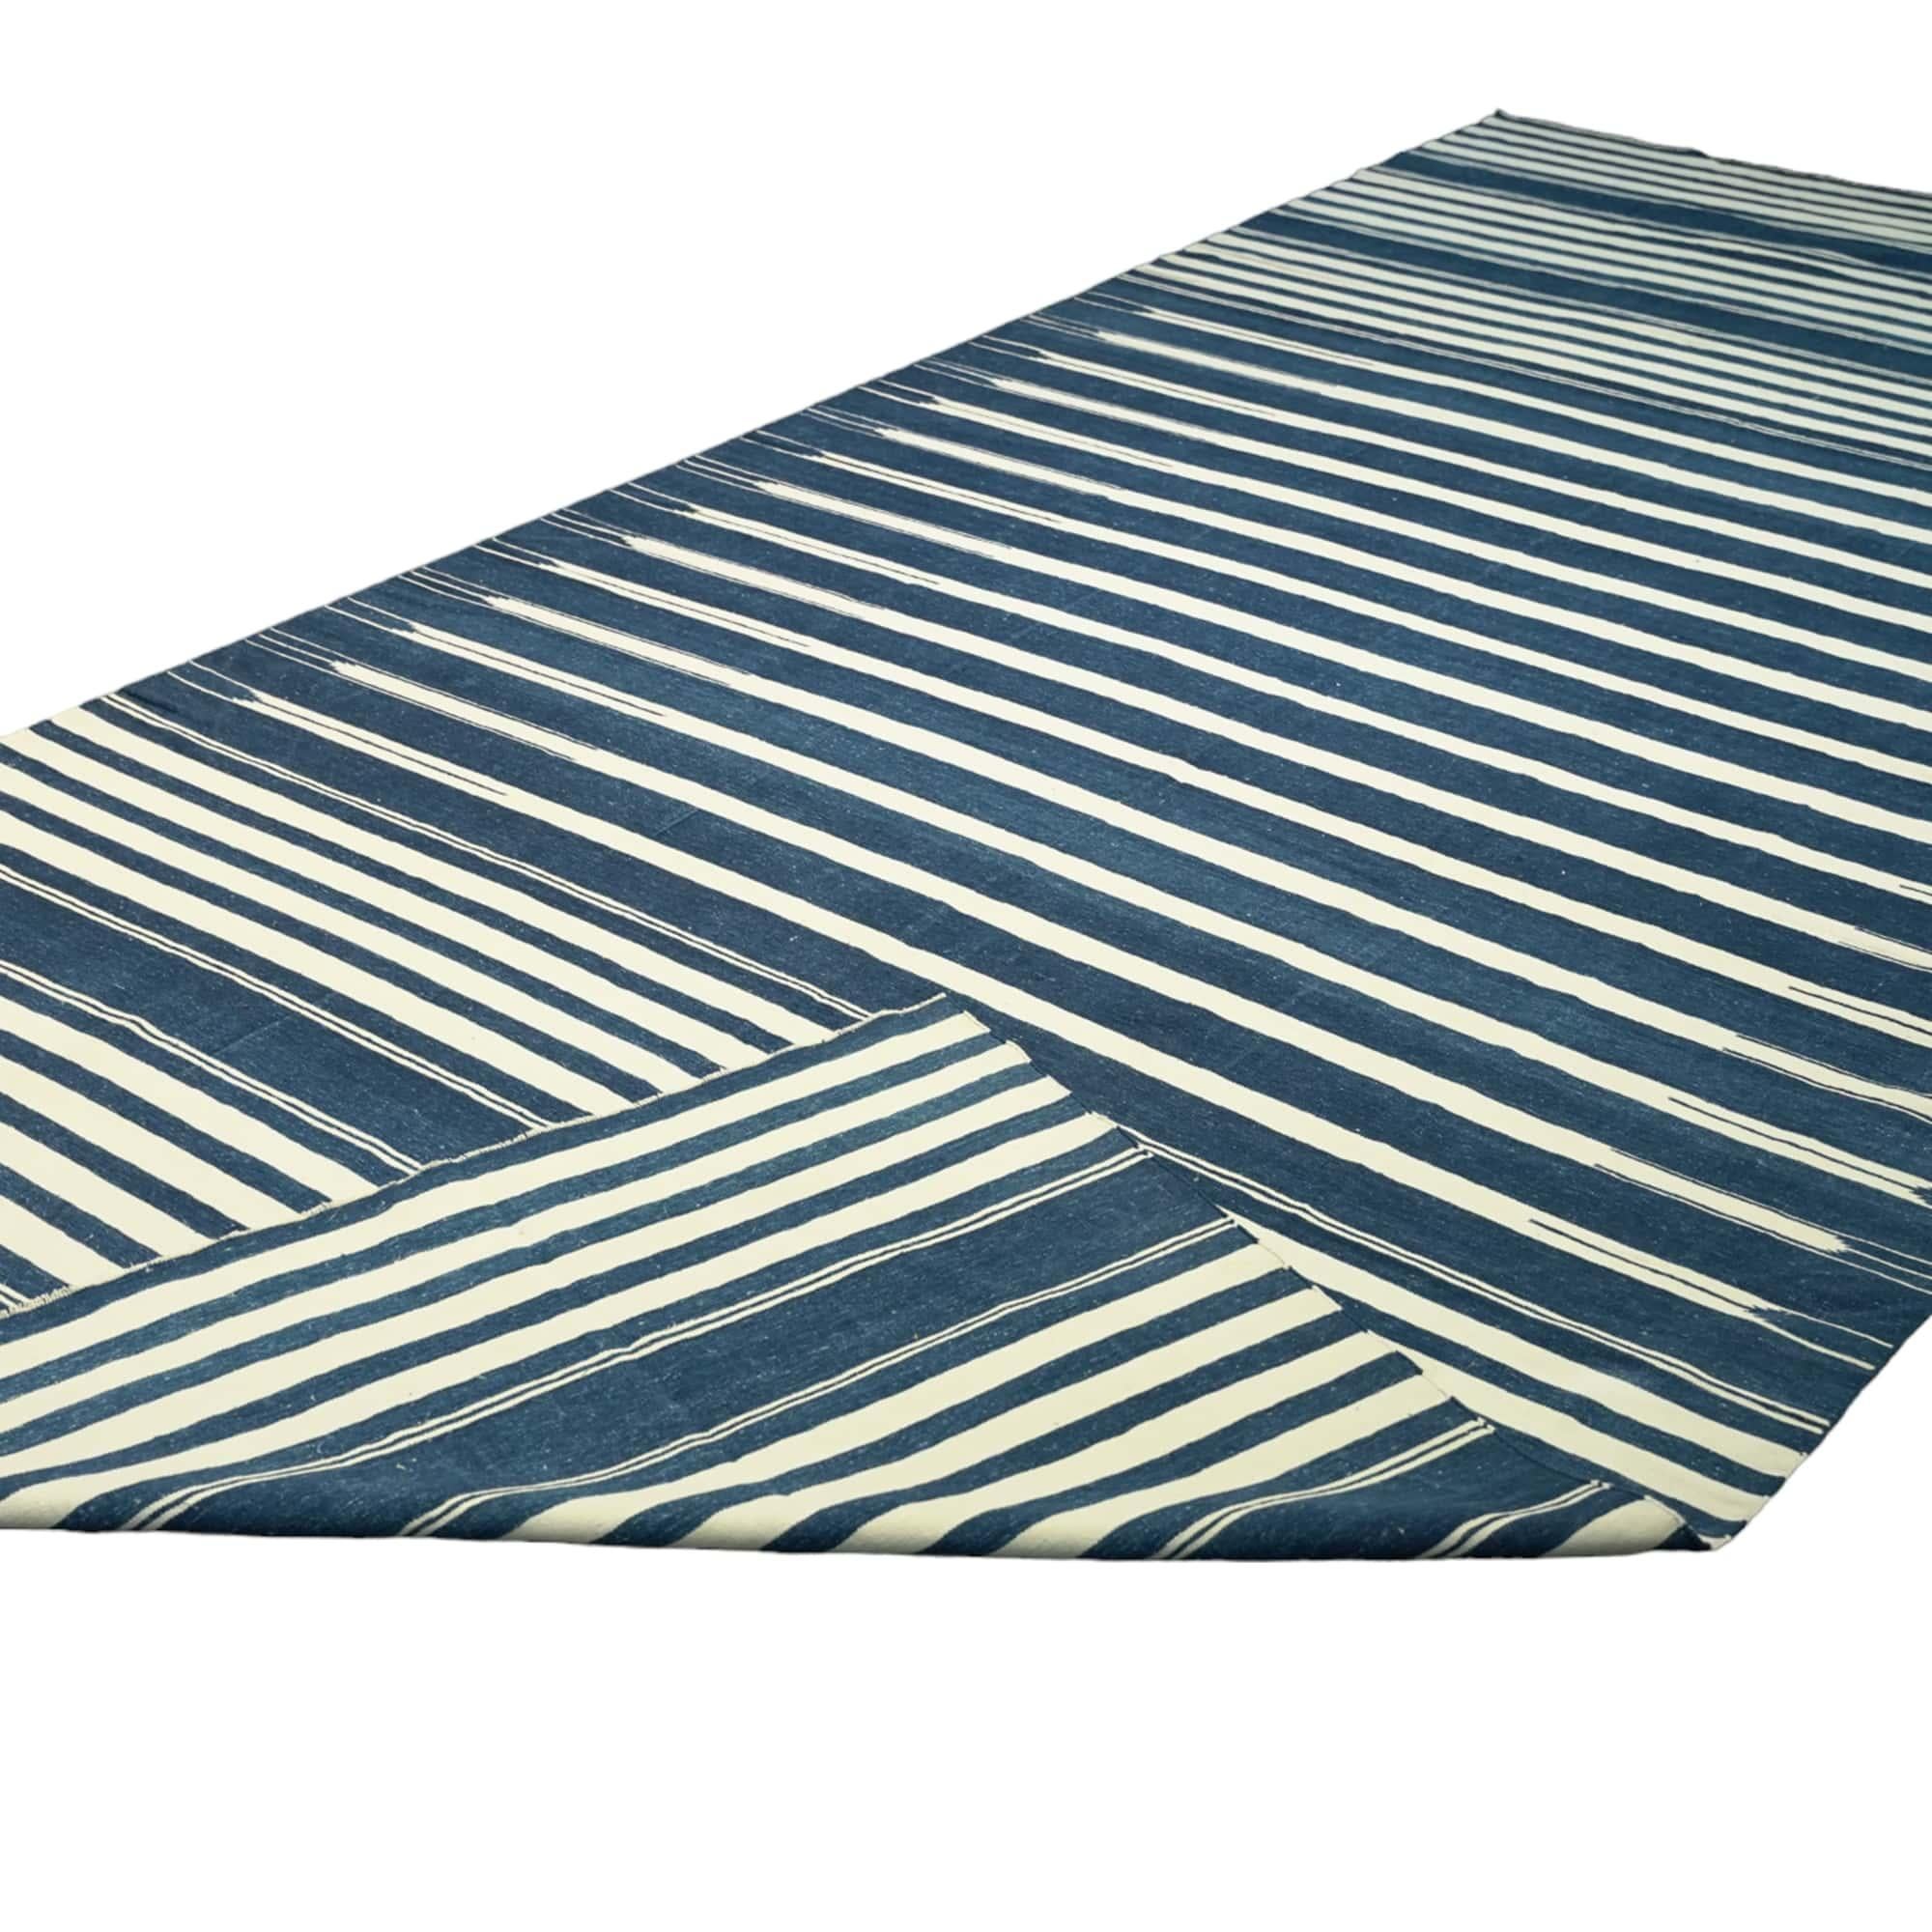 Hand-Woven Vintage Dhurrie Rug with White and Blue Stripes, from Rug & Kilim For Sale